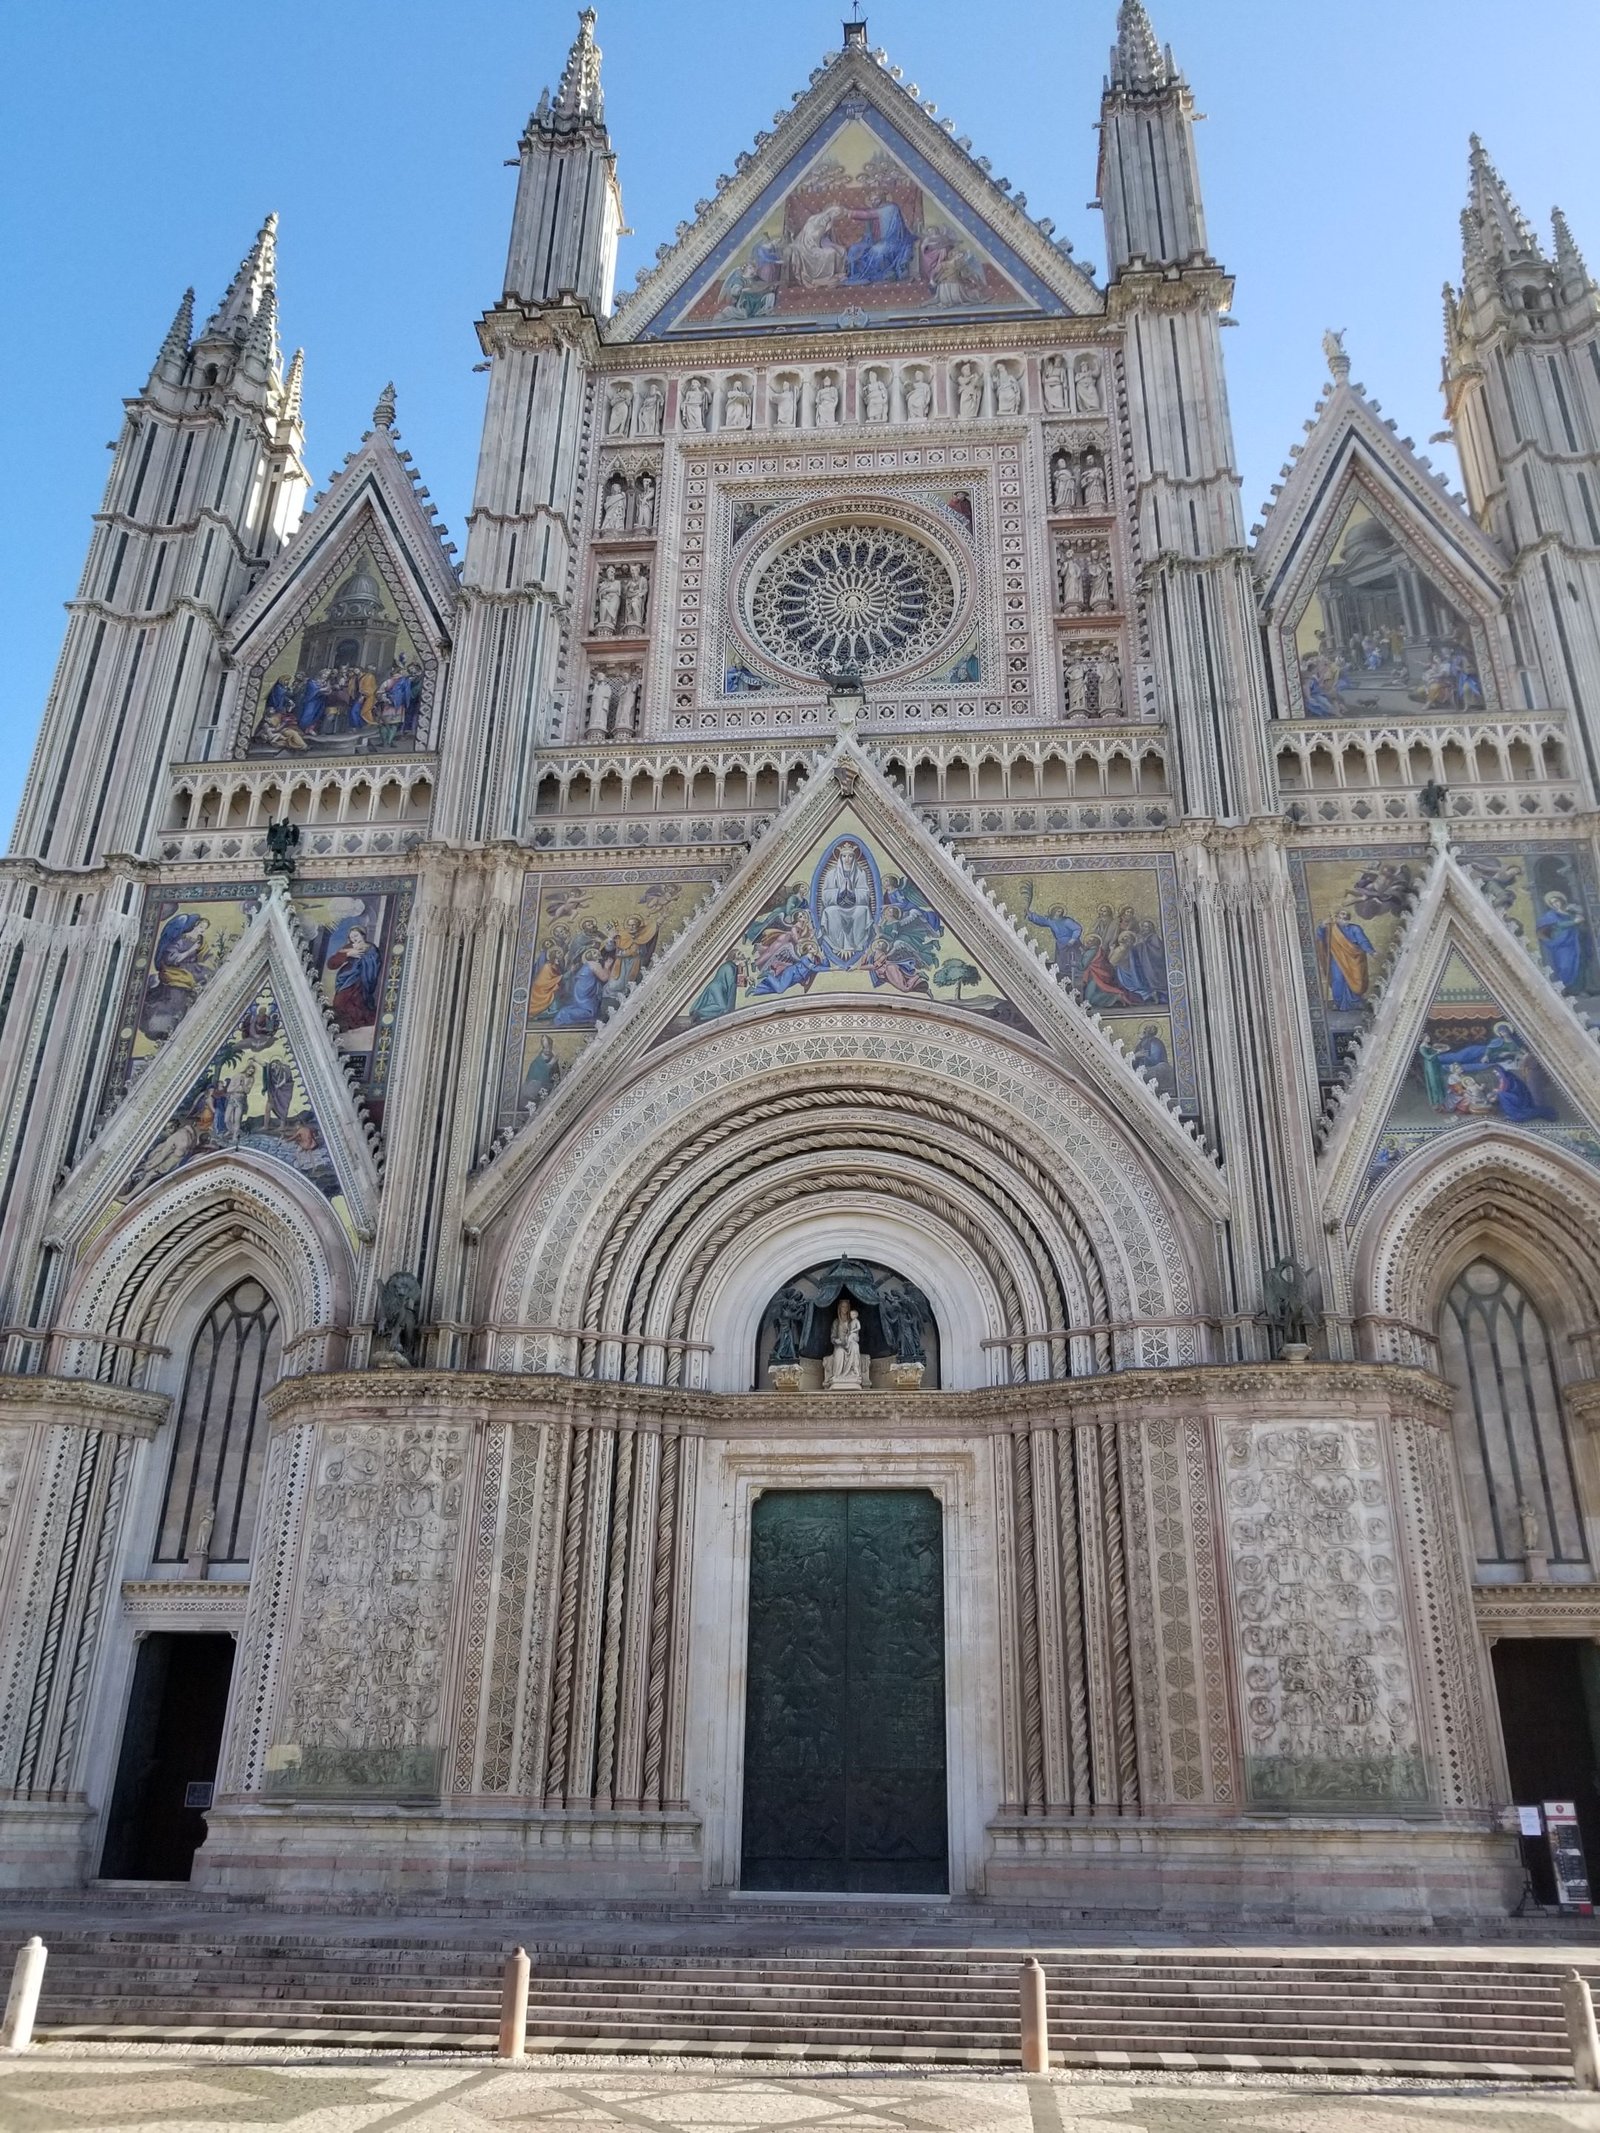 Duomo, Discover the old Etruscan city and its hidden treasures in Orvieto, ouritalianjourney.com